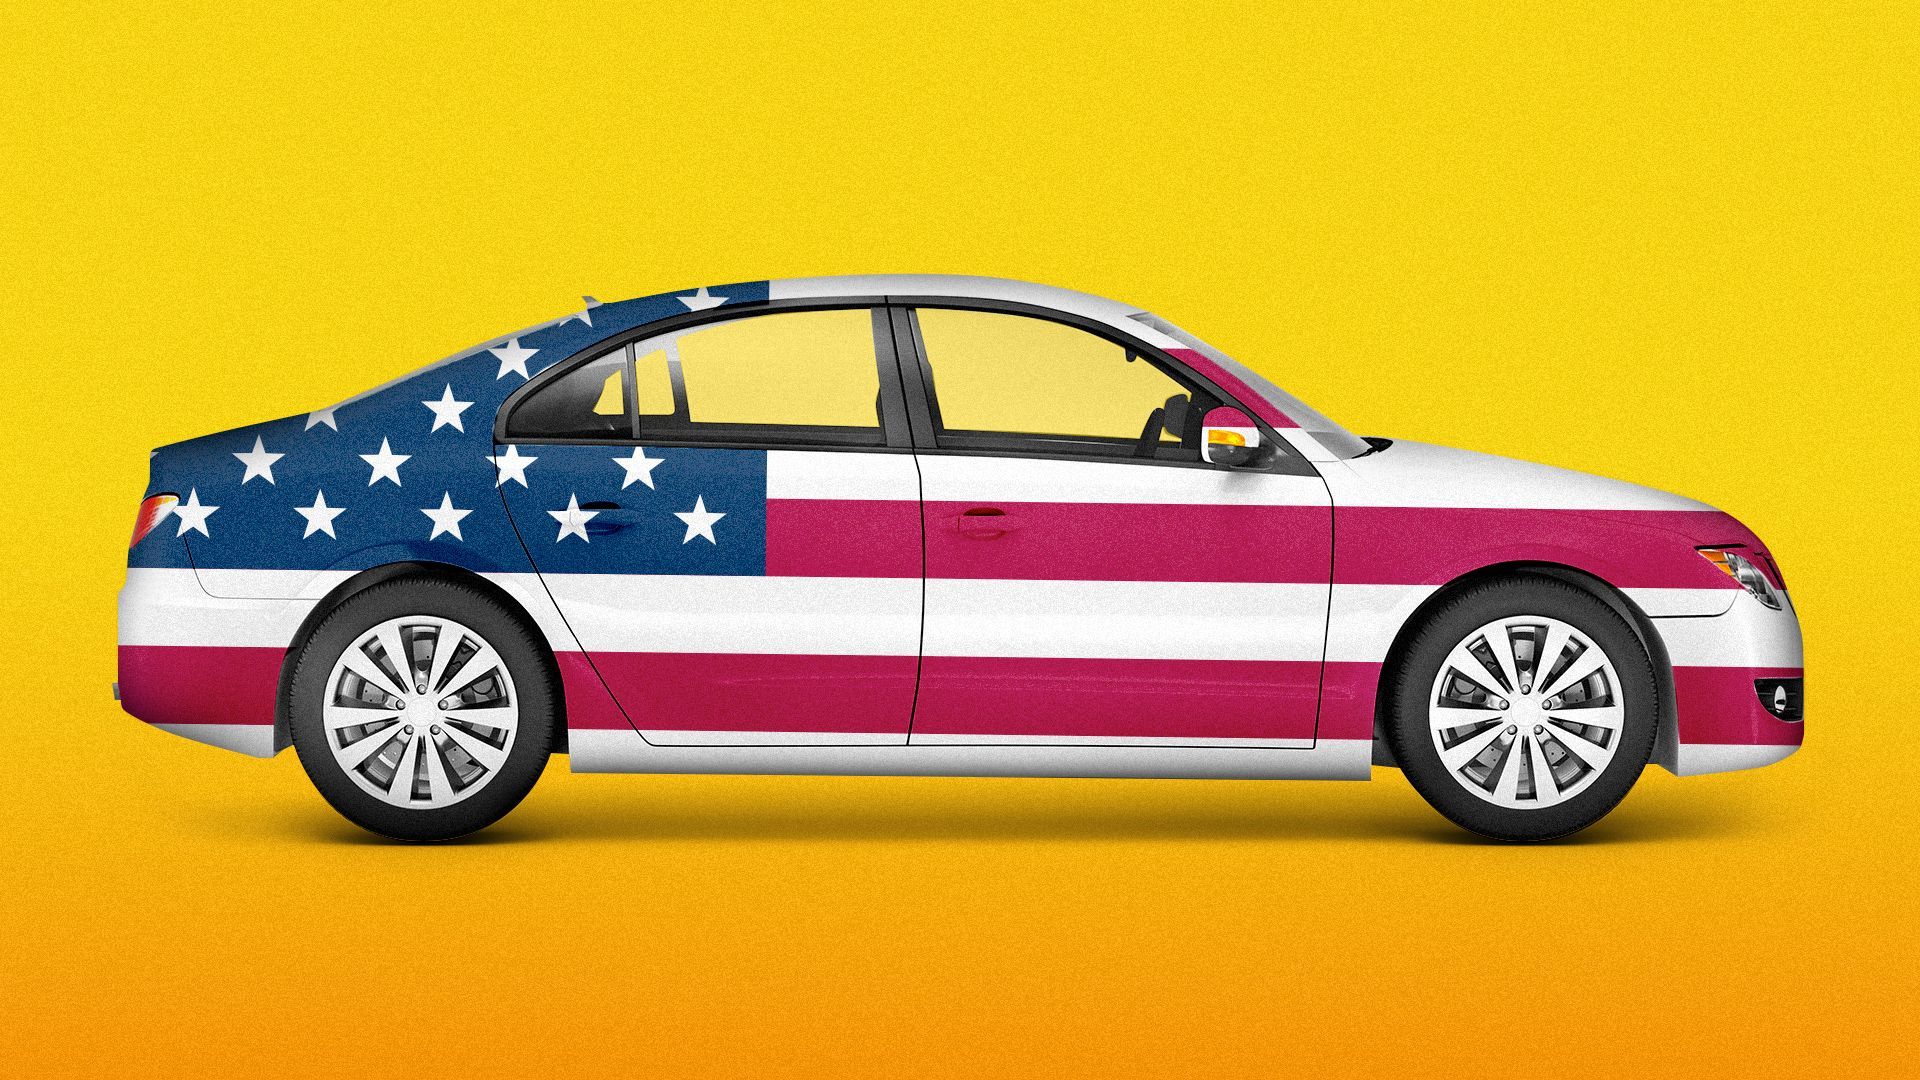 Illustration of a car with an American flag pattern. 